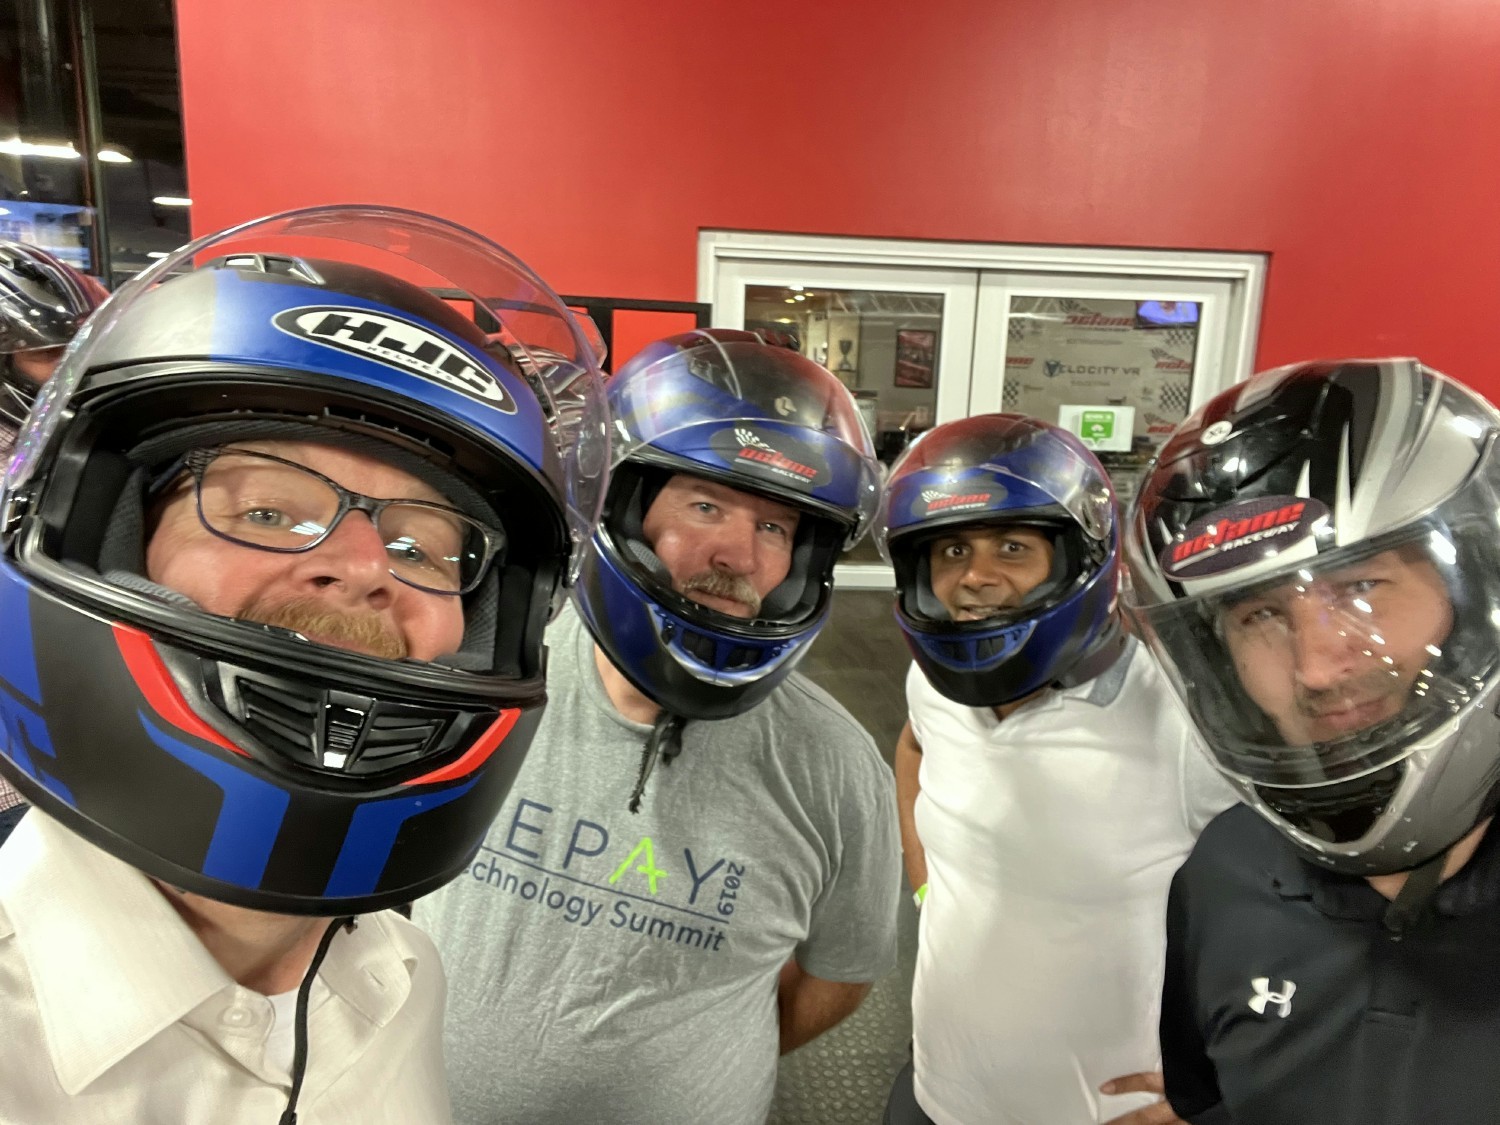 Go-Kart group outing for our Technology Summit!